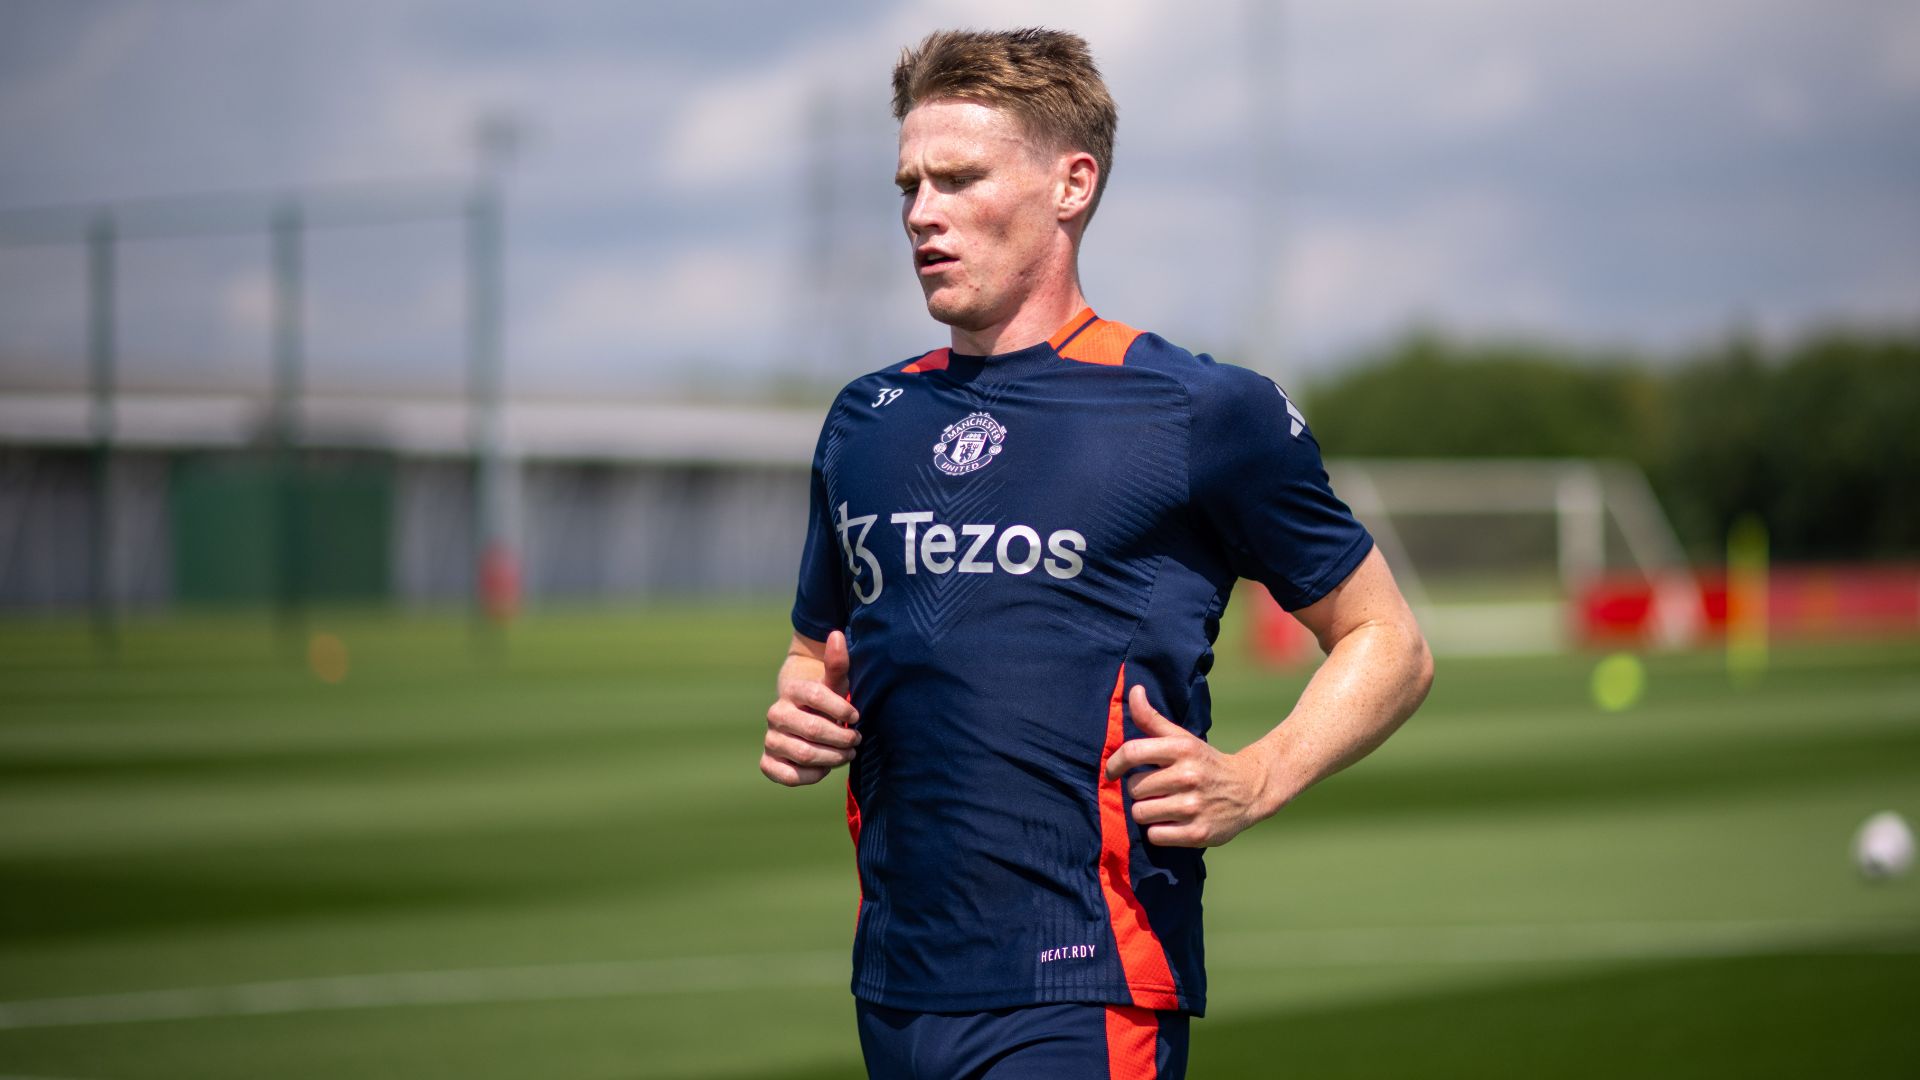 Ten Hag wants McTominay to stay